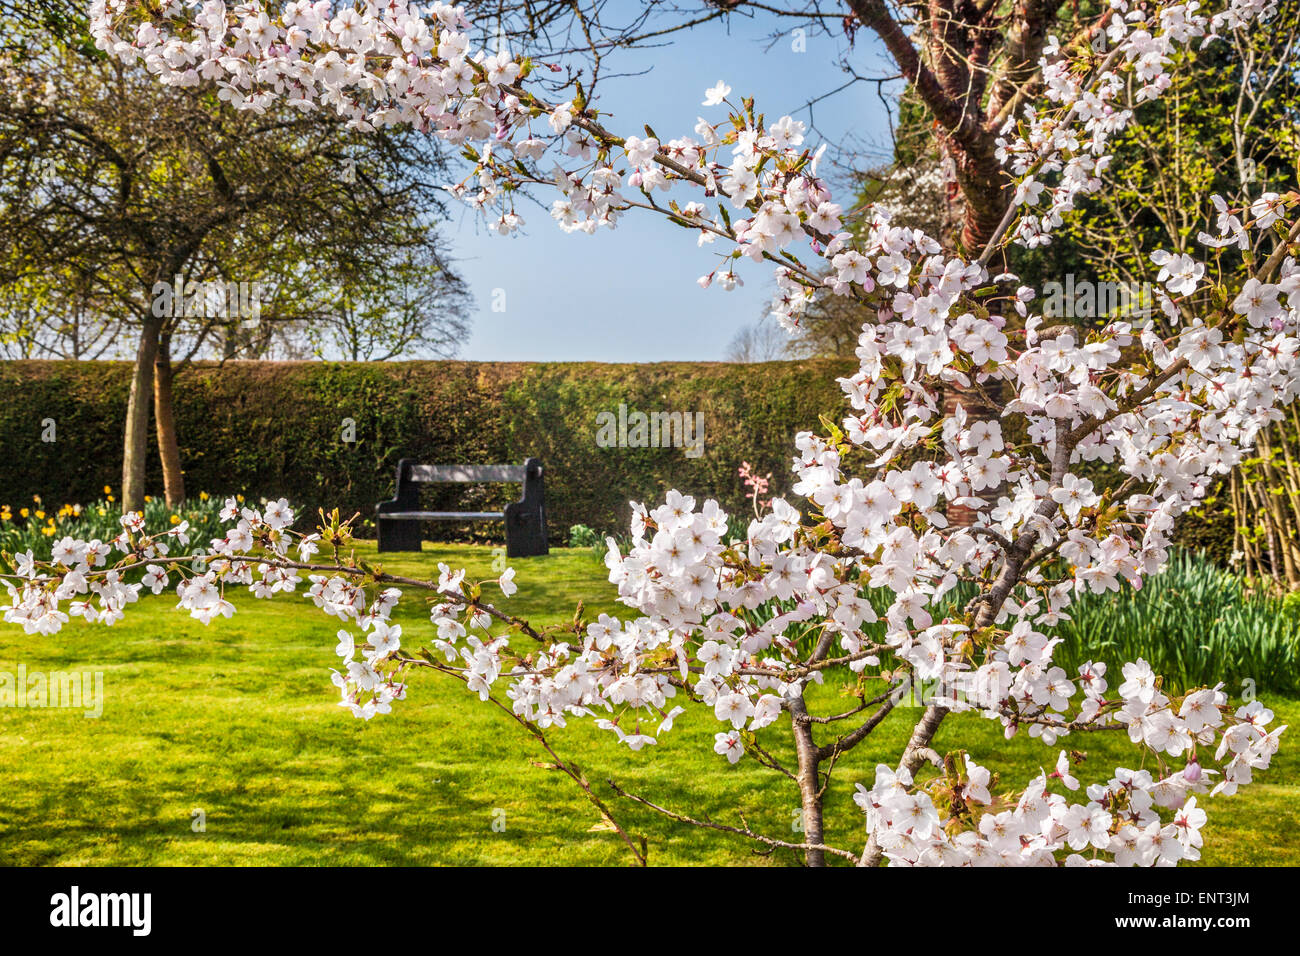 Cherry tree in flower in the Spring Garden at the Bowood Estate in Wiltshire. Stock Photo